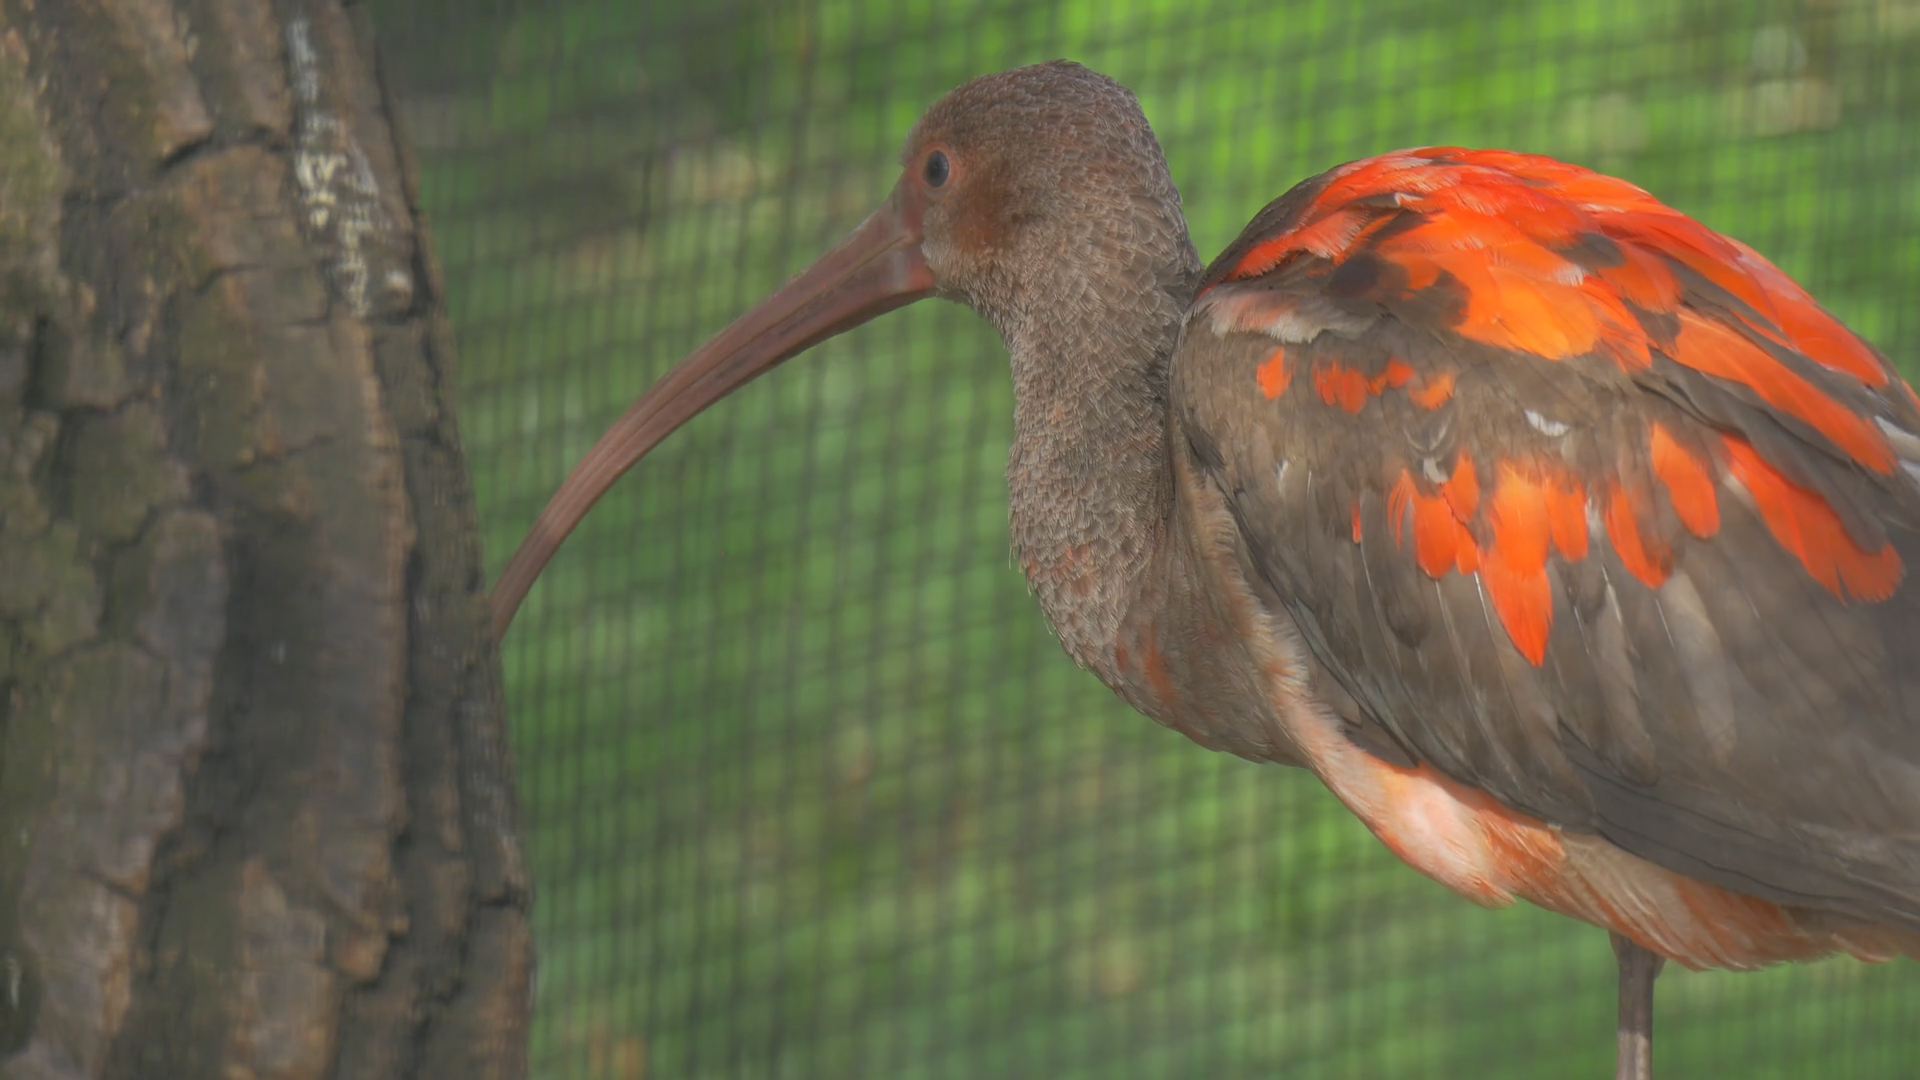 Red and Gray Juvenile Scarlet Ibis Bird in Cage Red Feathers Long ...